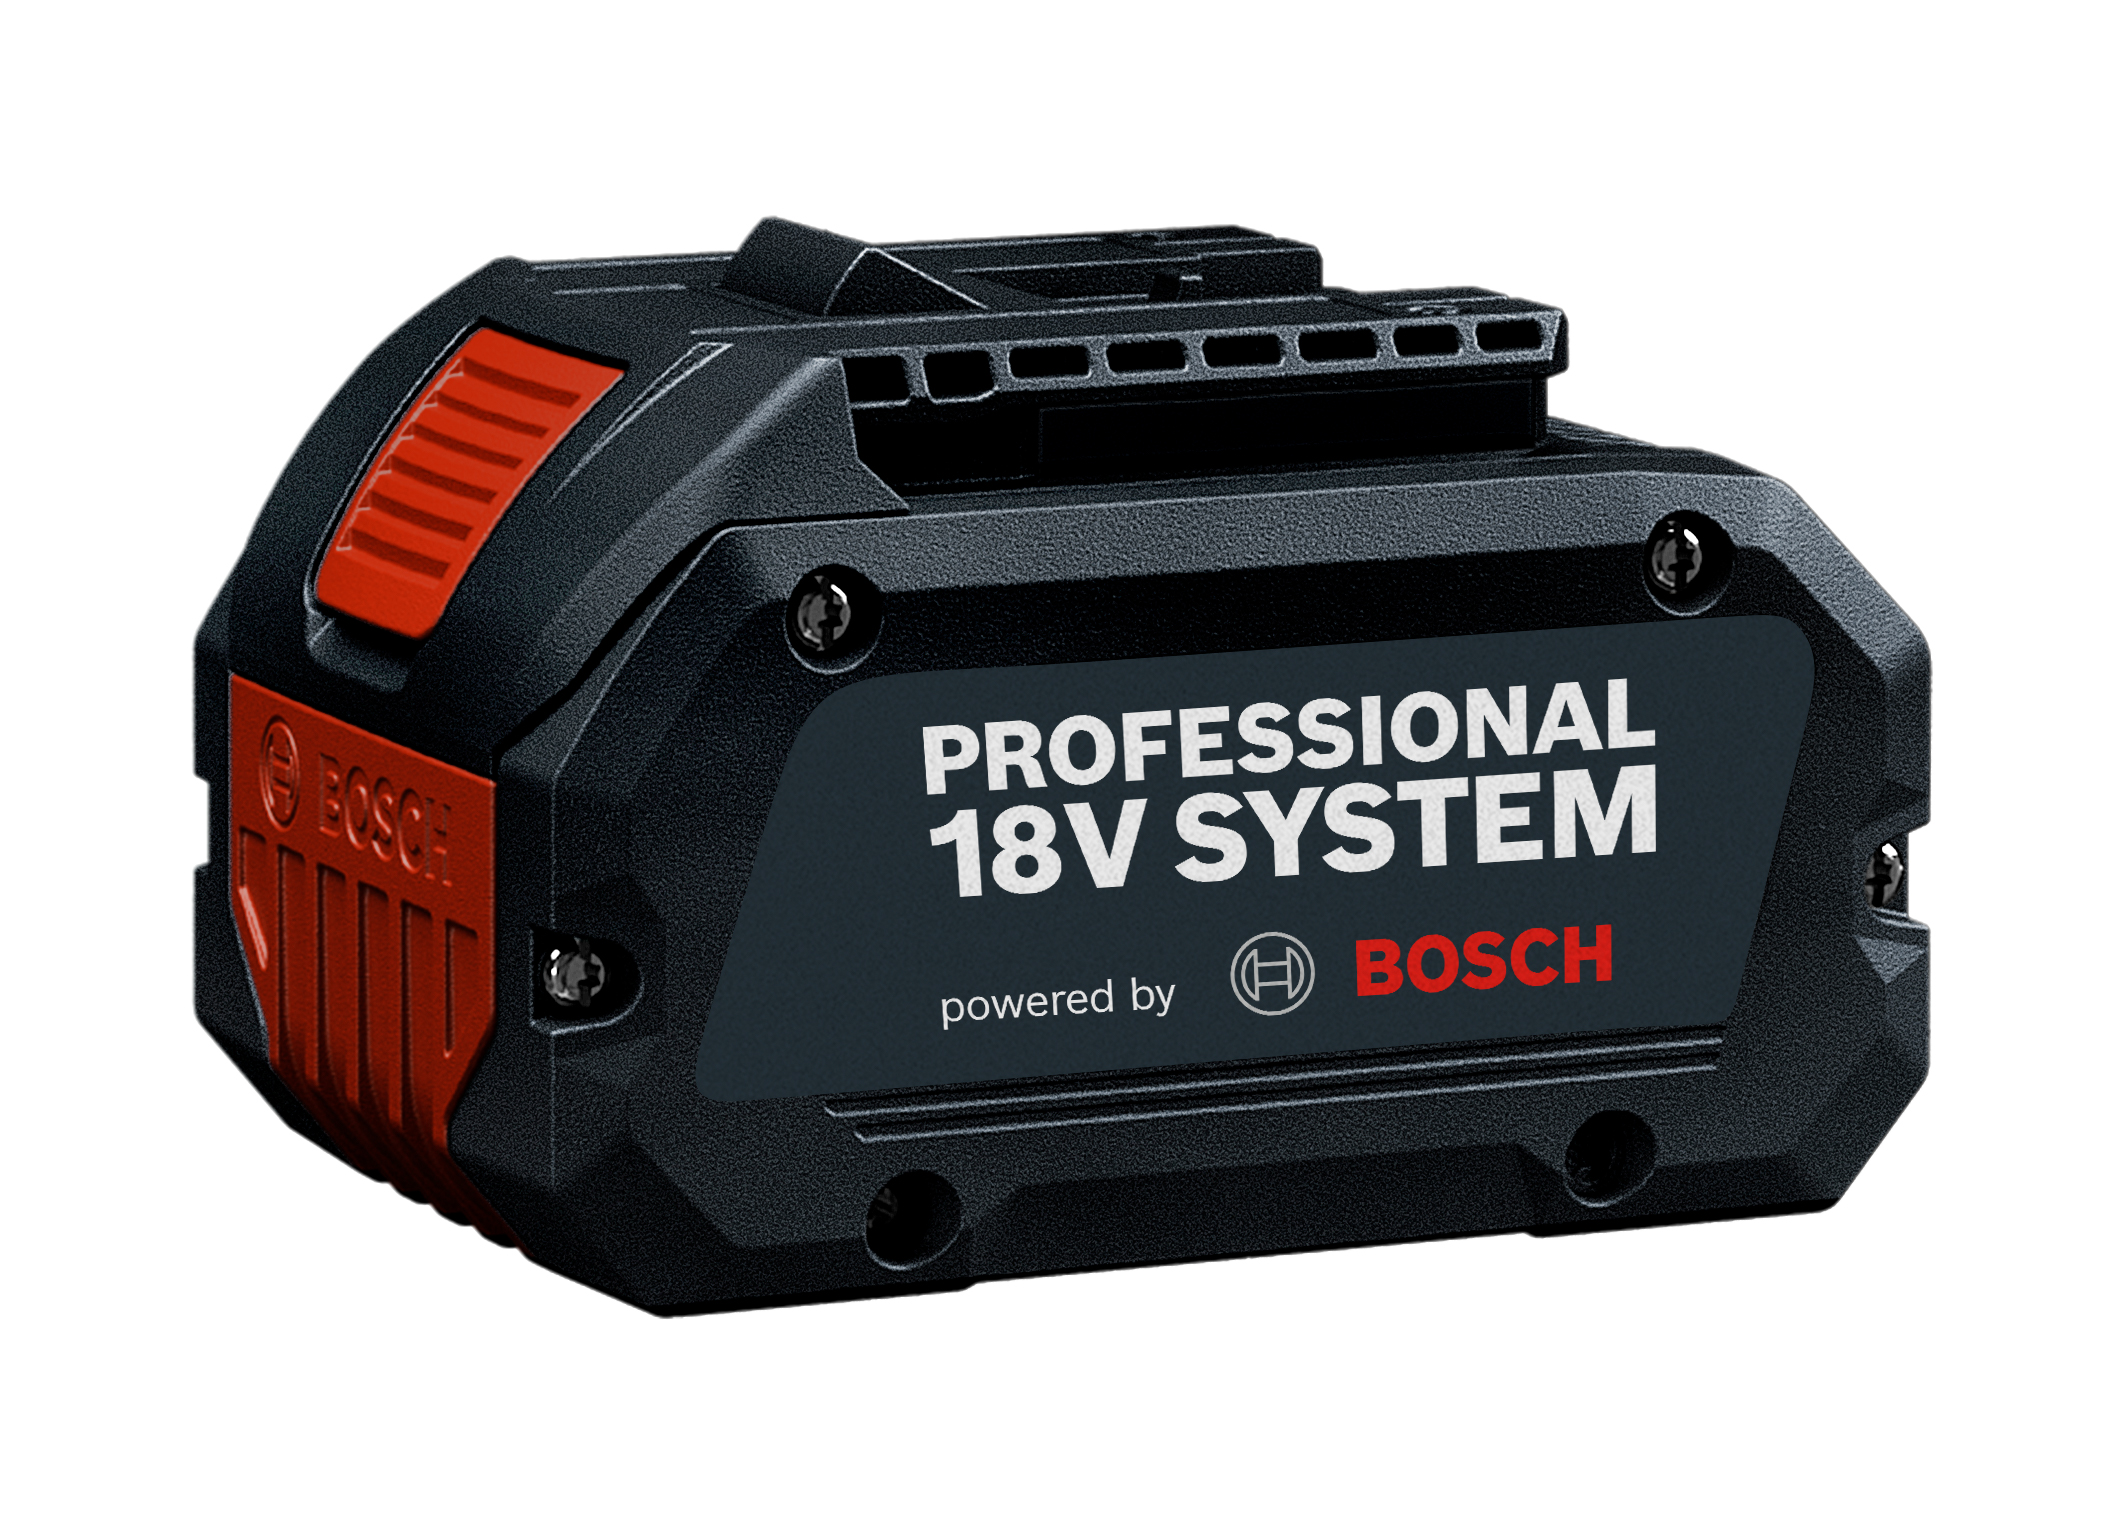 Further expansion of the Professional 18V System: Partners and users relying on Bosch